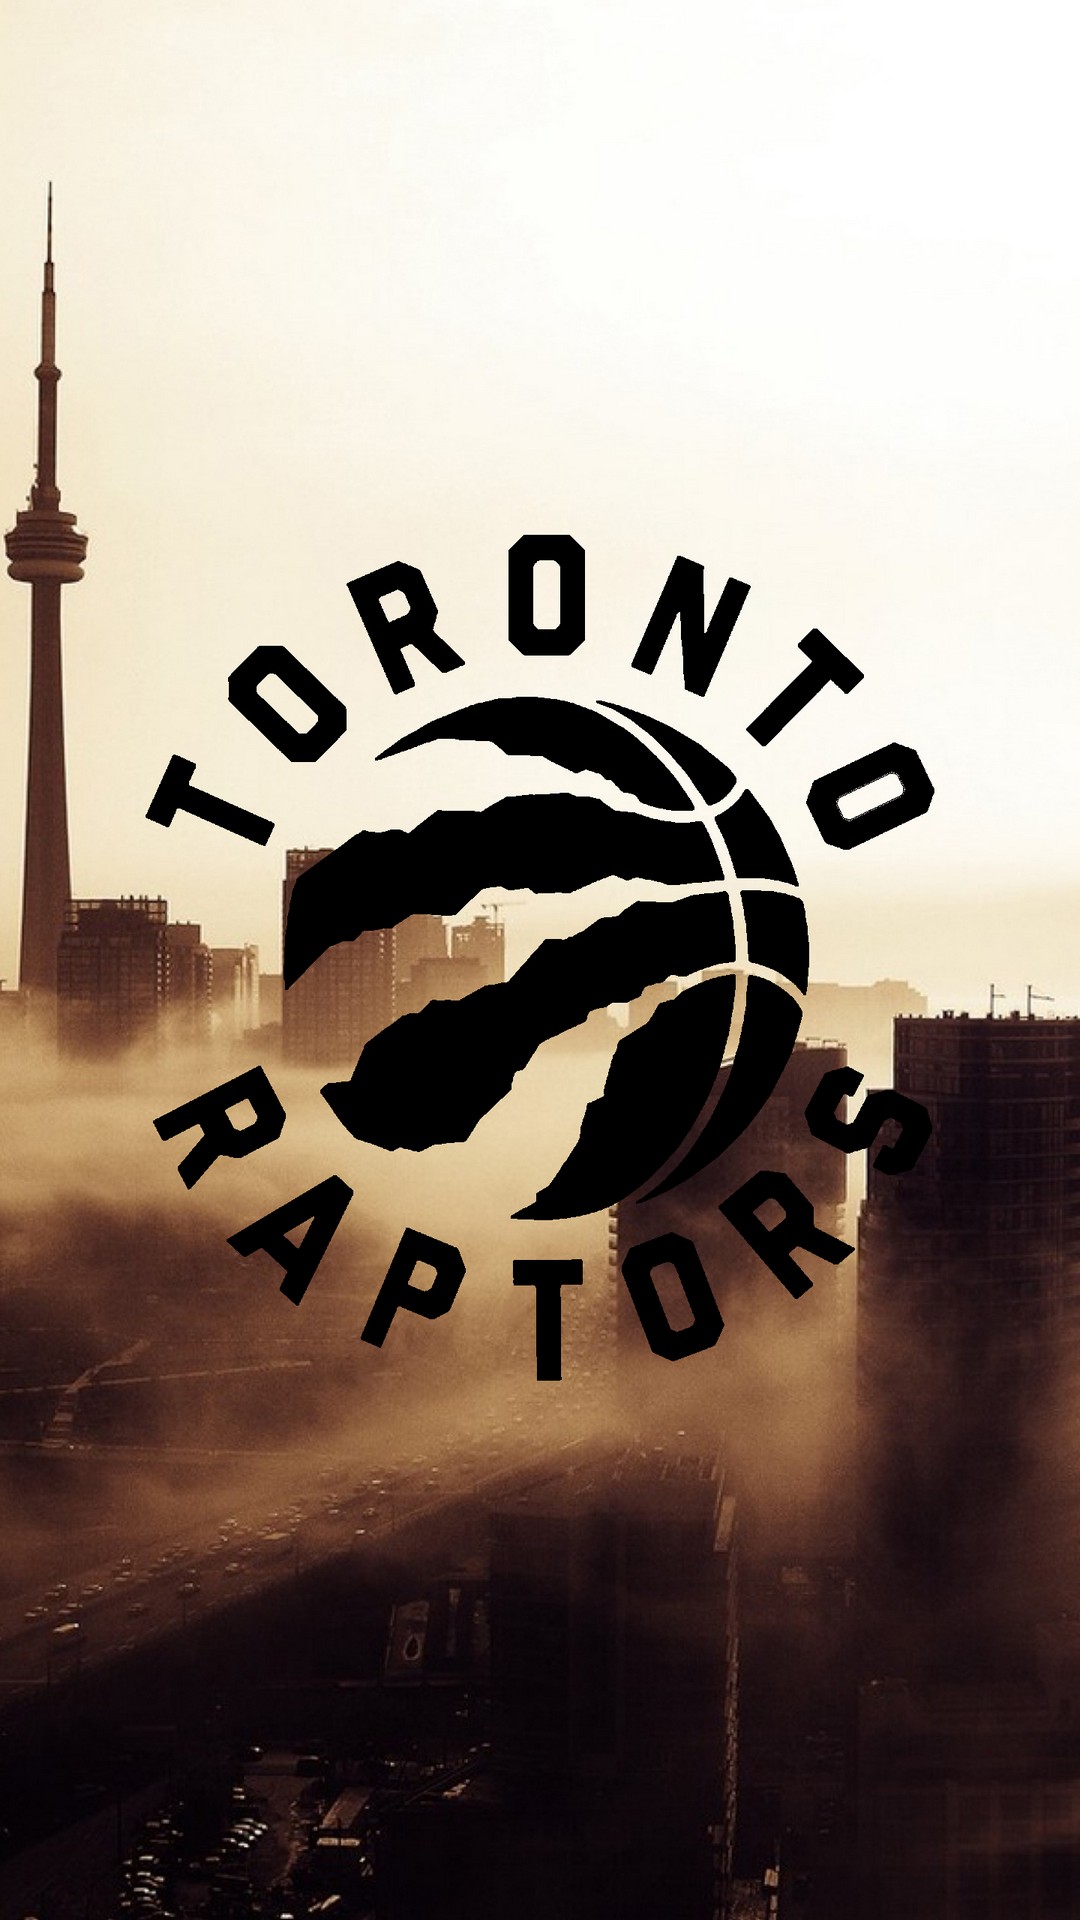 Toronto Raptors Android Wallpaper with resolution 1080X1920 pixel. You can make this wallpaper for your Android backgrounds, Tablet, Smartphones Screensavers and Mobile Phone Lock Screen